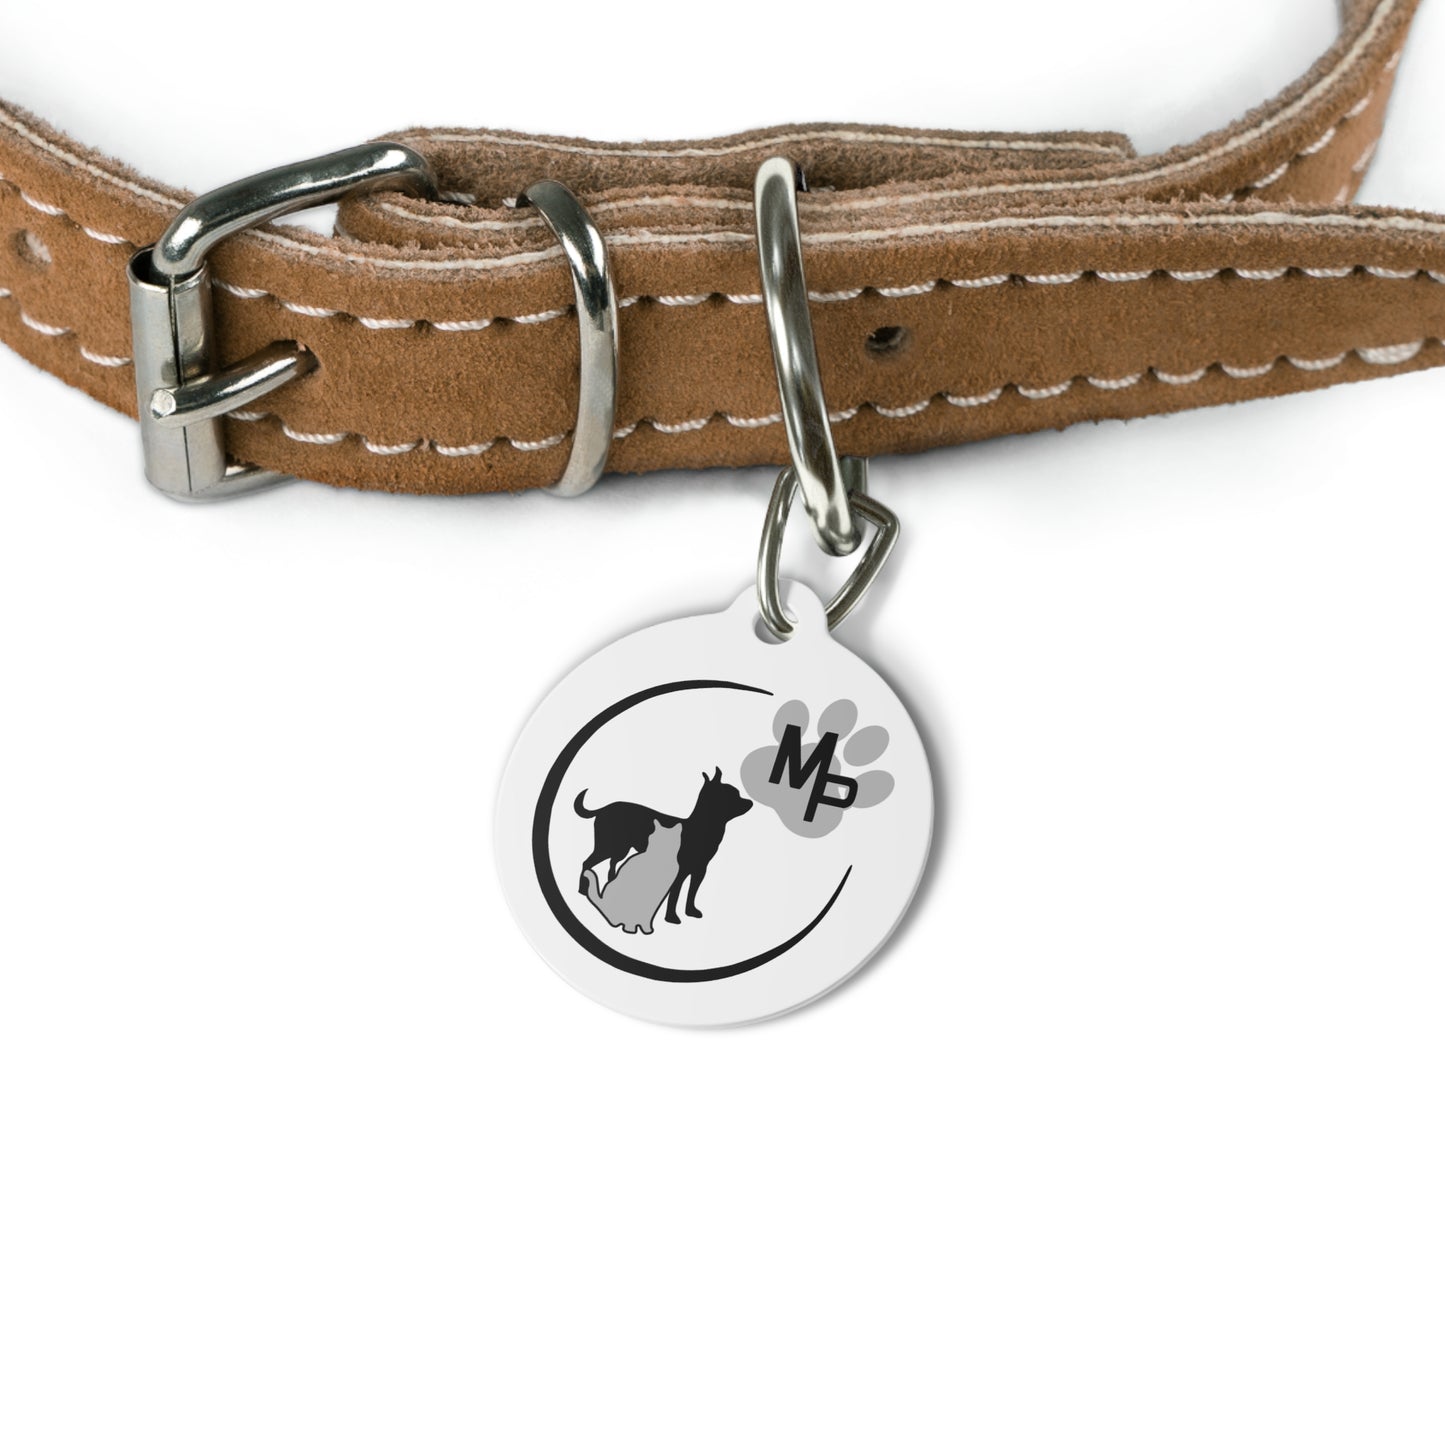 Monkey's Pack Pet Tag